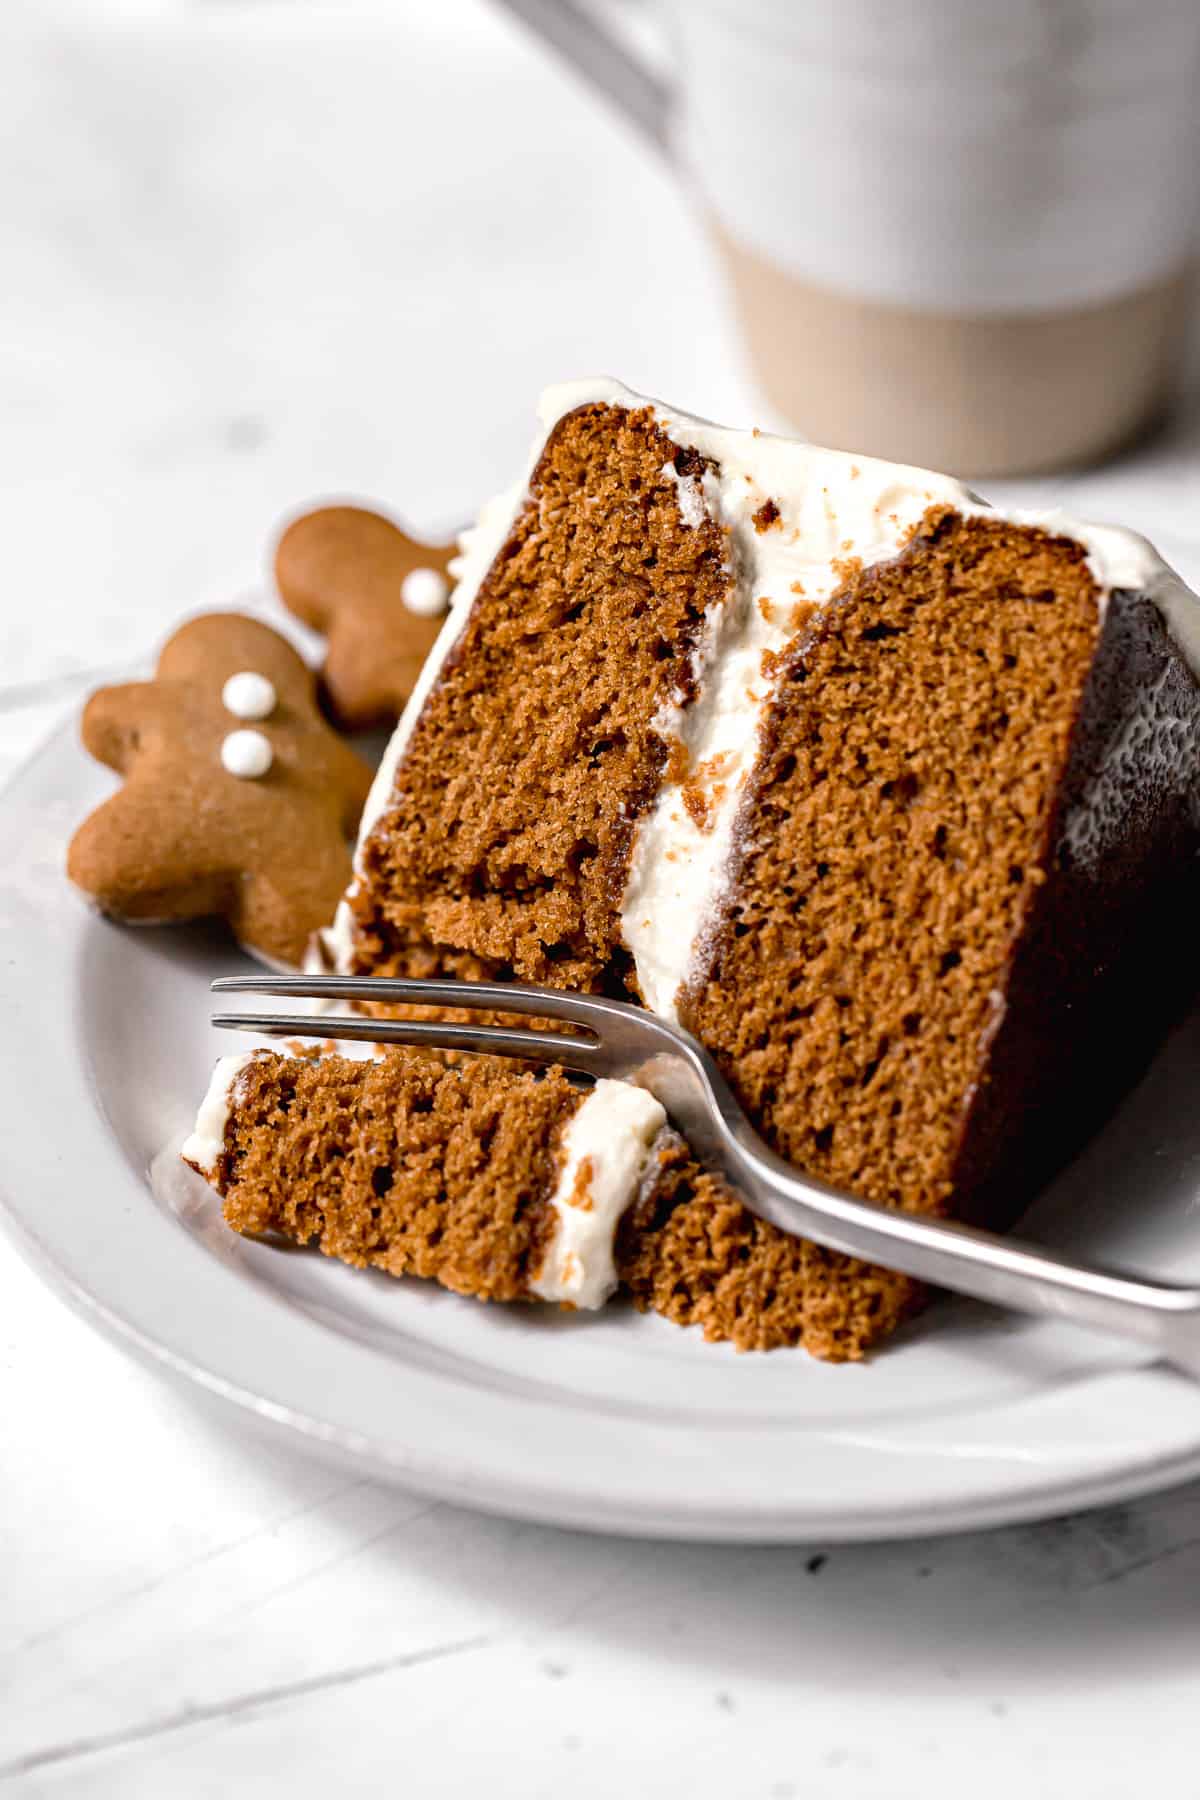 piece of gingerbread cake on white plate.